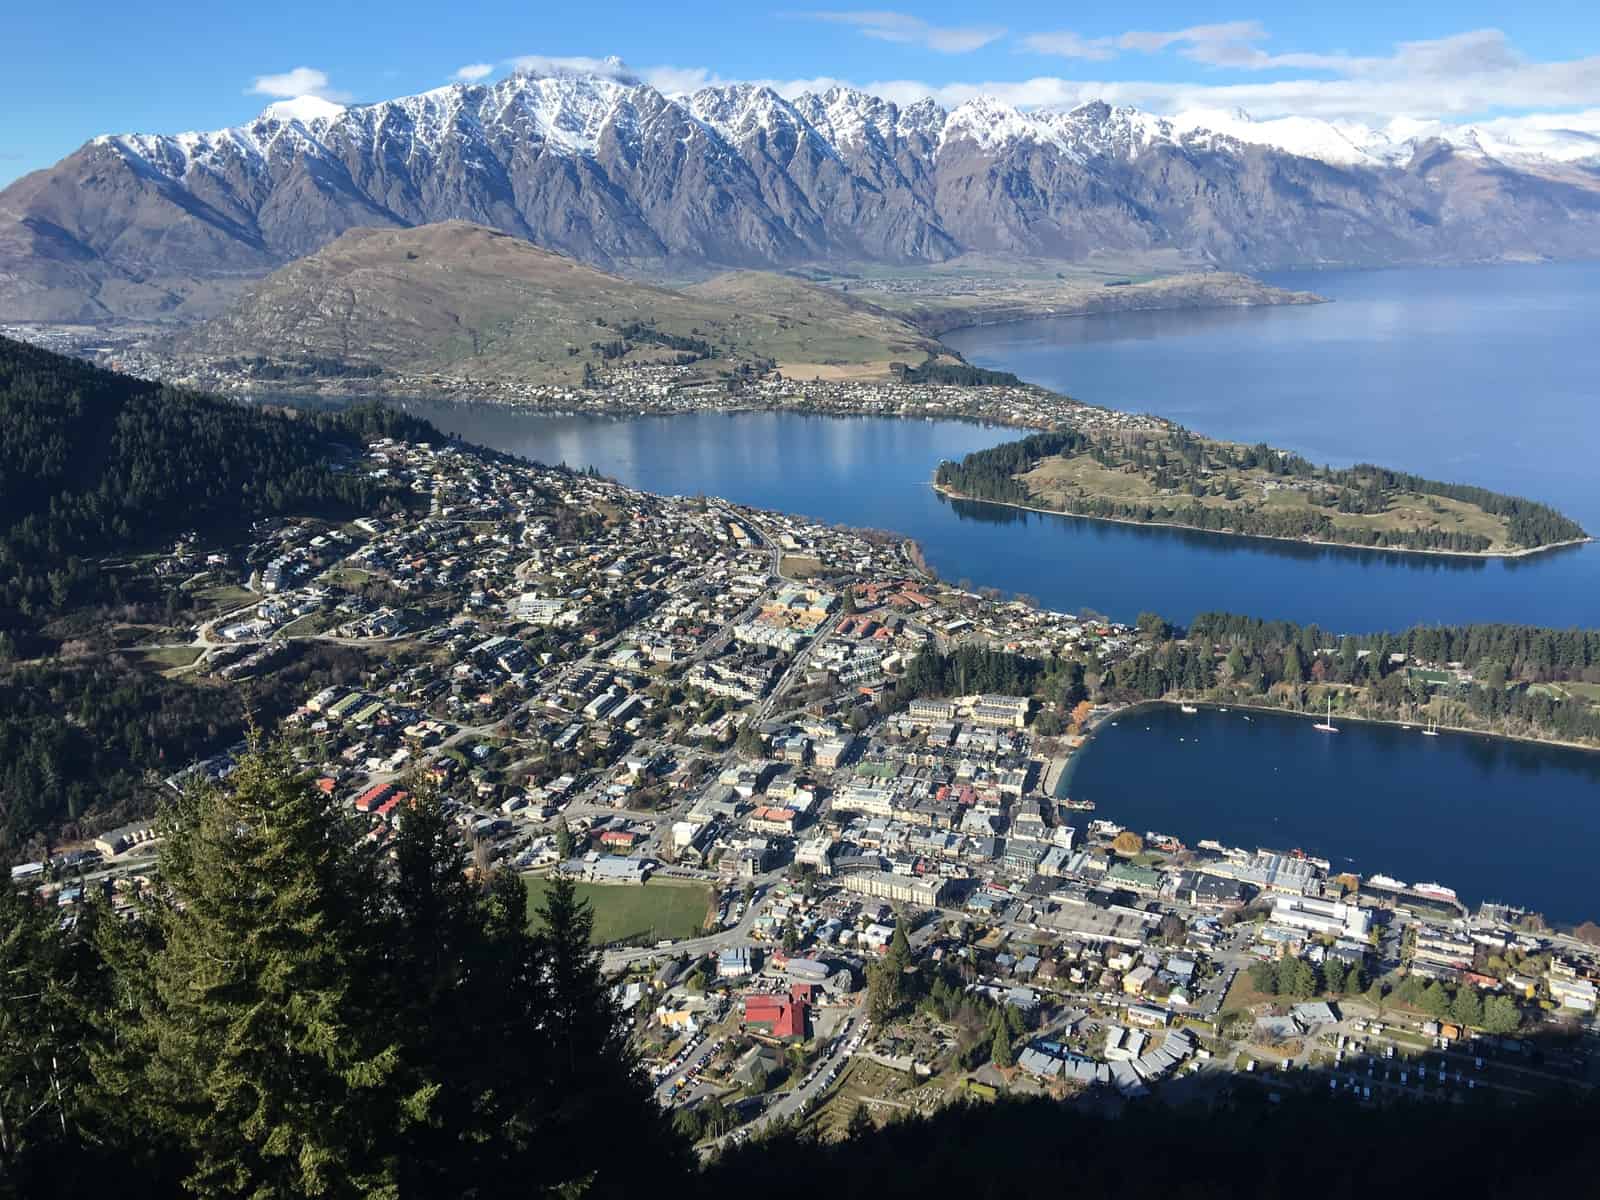 The view over Queenstown, South Island